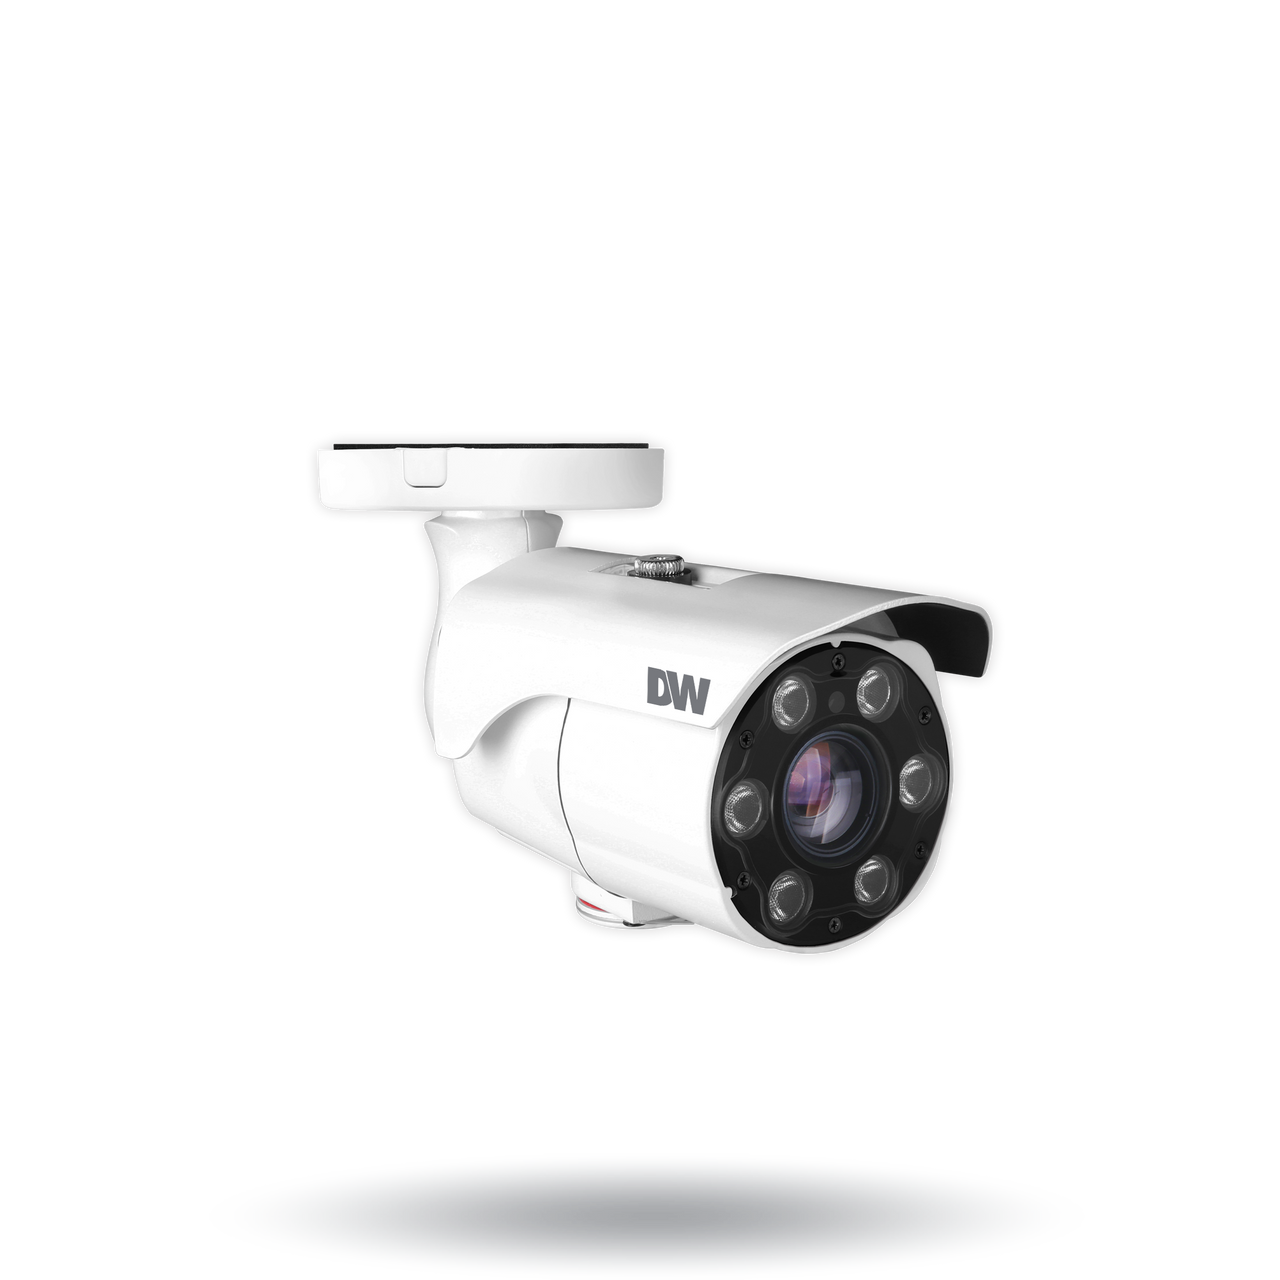 Digital Watchdog DWC-MPB45Wi650TW 5MP Outdoor Bullet IP Security Camera with 6~50mm Lens and Intelligent Video Analytics Plus